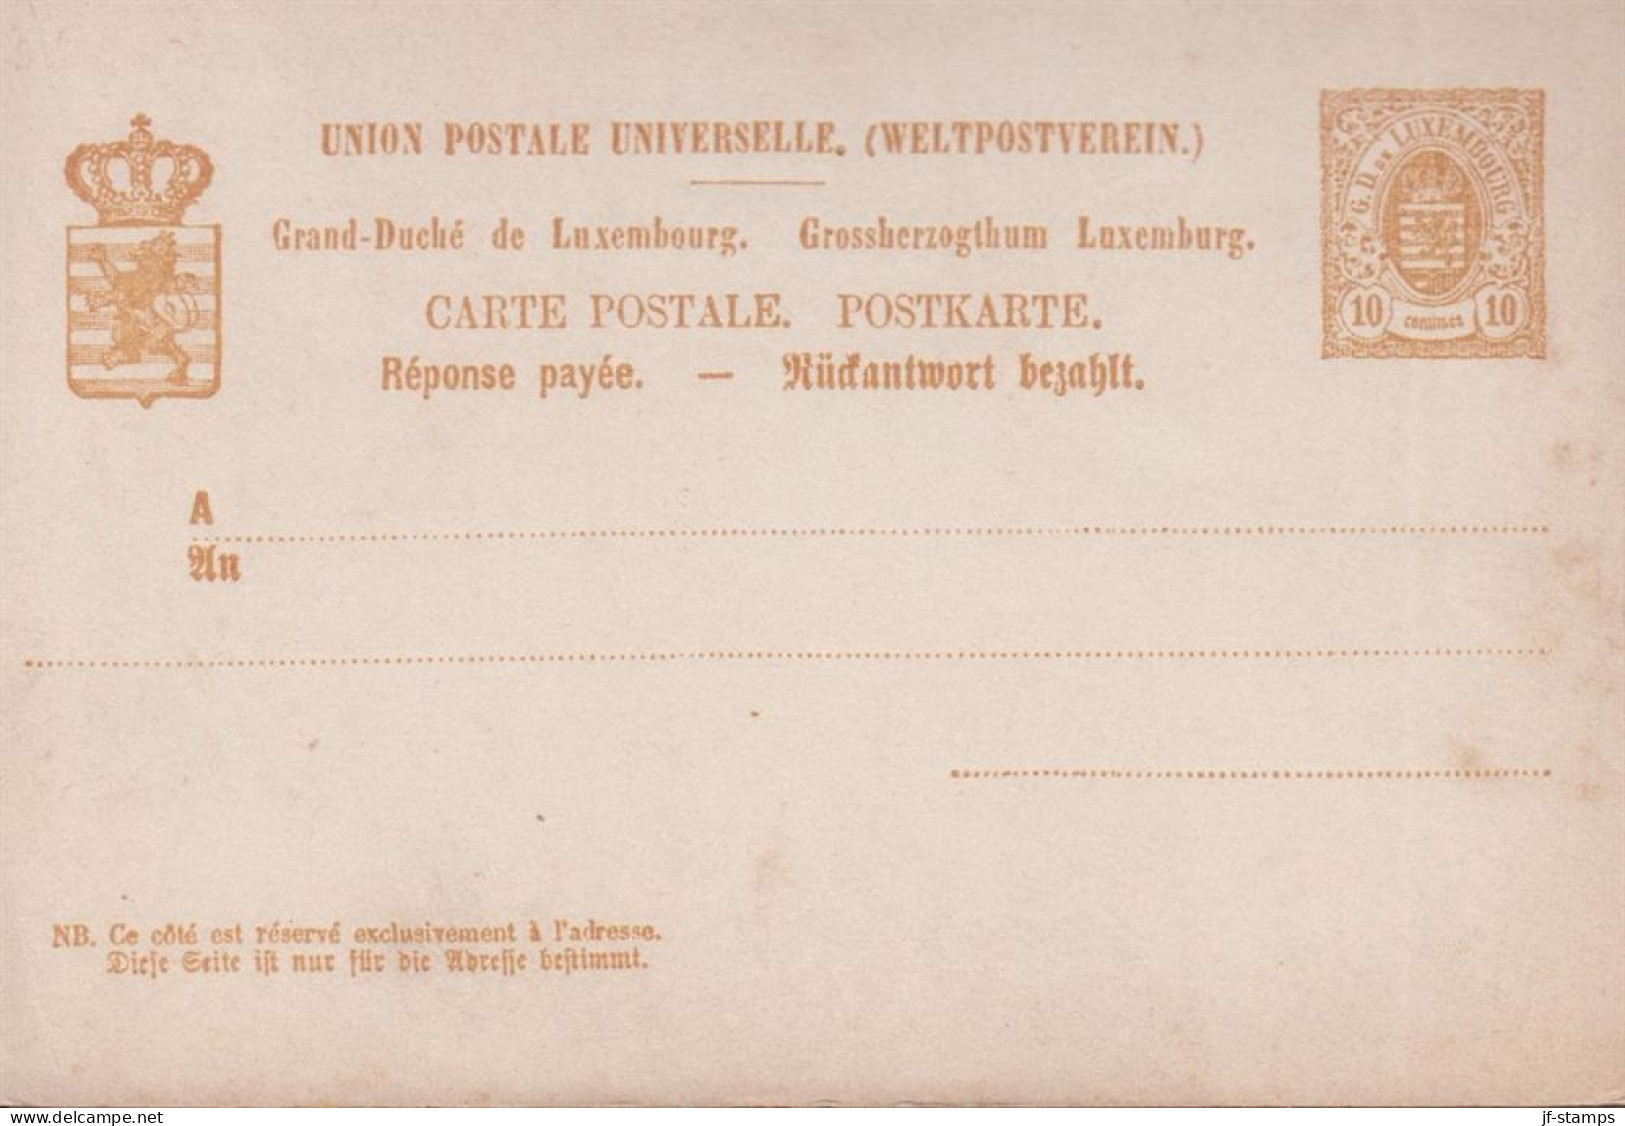 1879. LUXEMBOURG. CARTE POSTALE. 10 Centimes Double Card With Response Payee. - JF445177 - Entiers Postaux